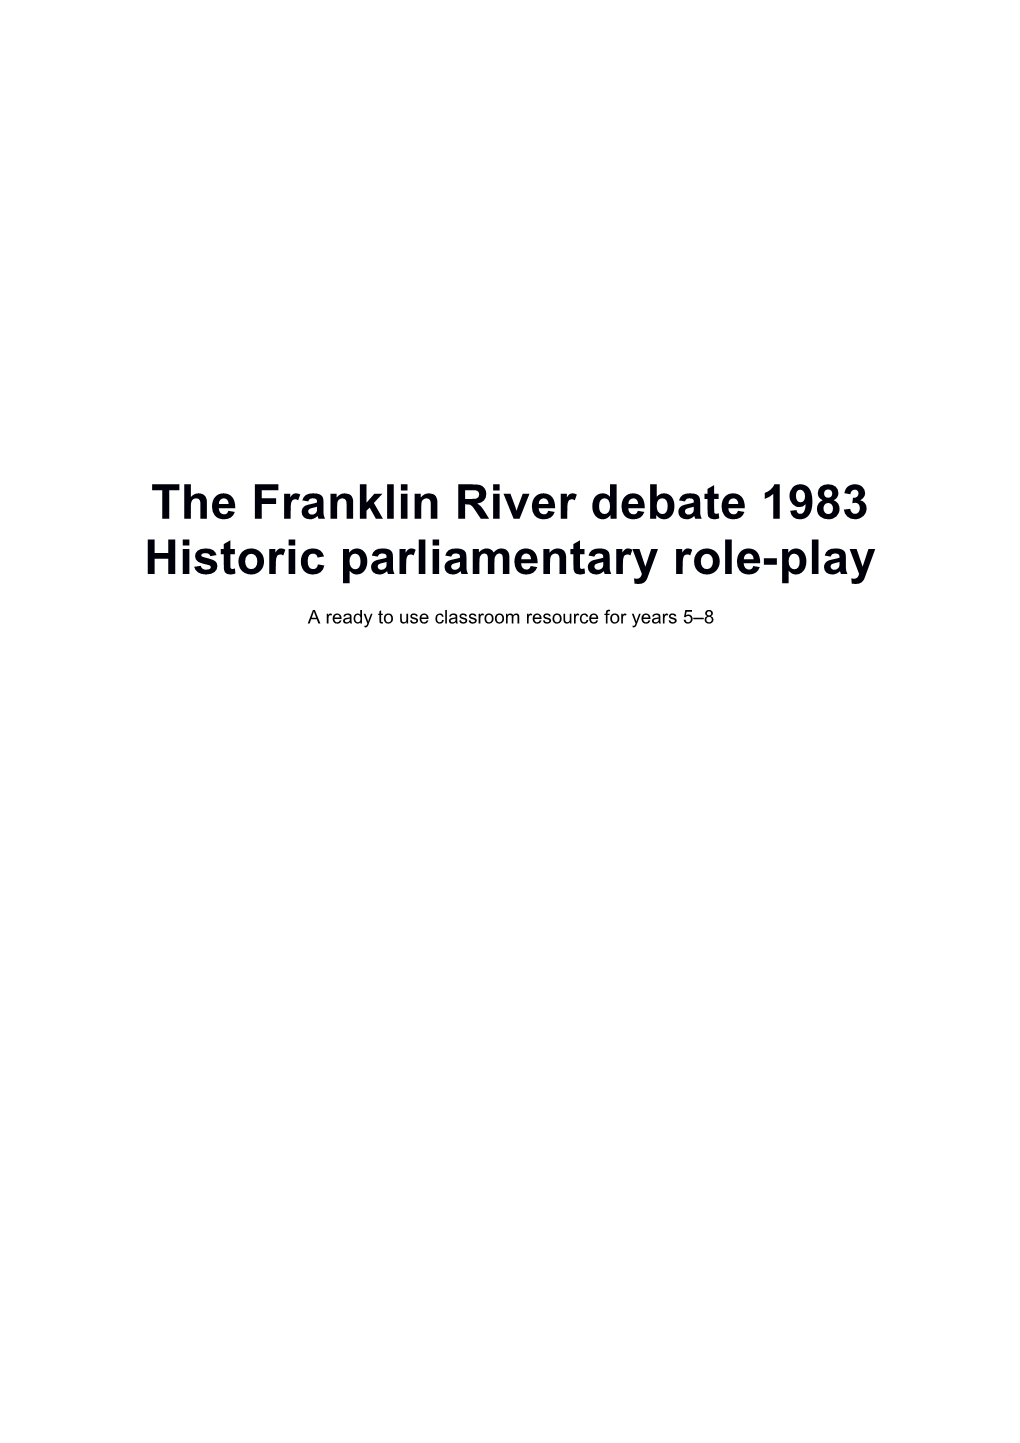 The Franklin River Debate 1983 Historic Parliamentary Role-Play